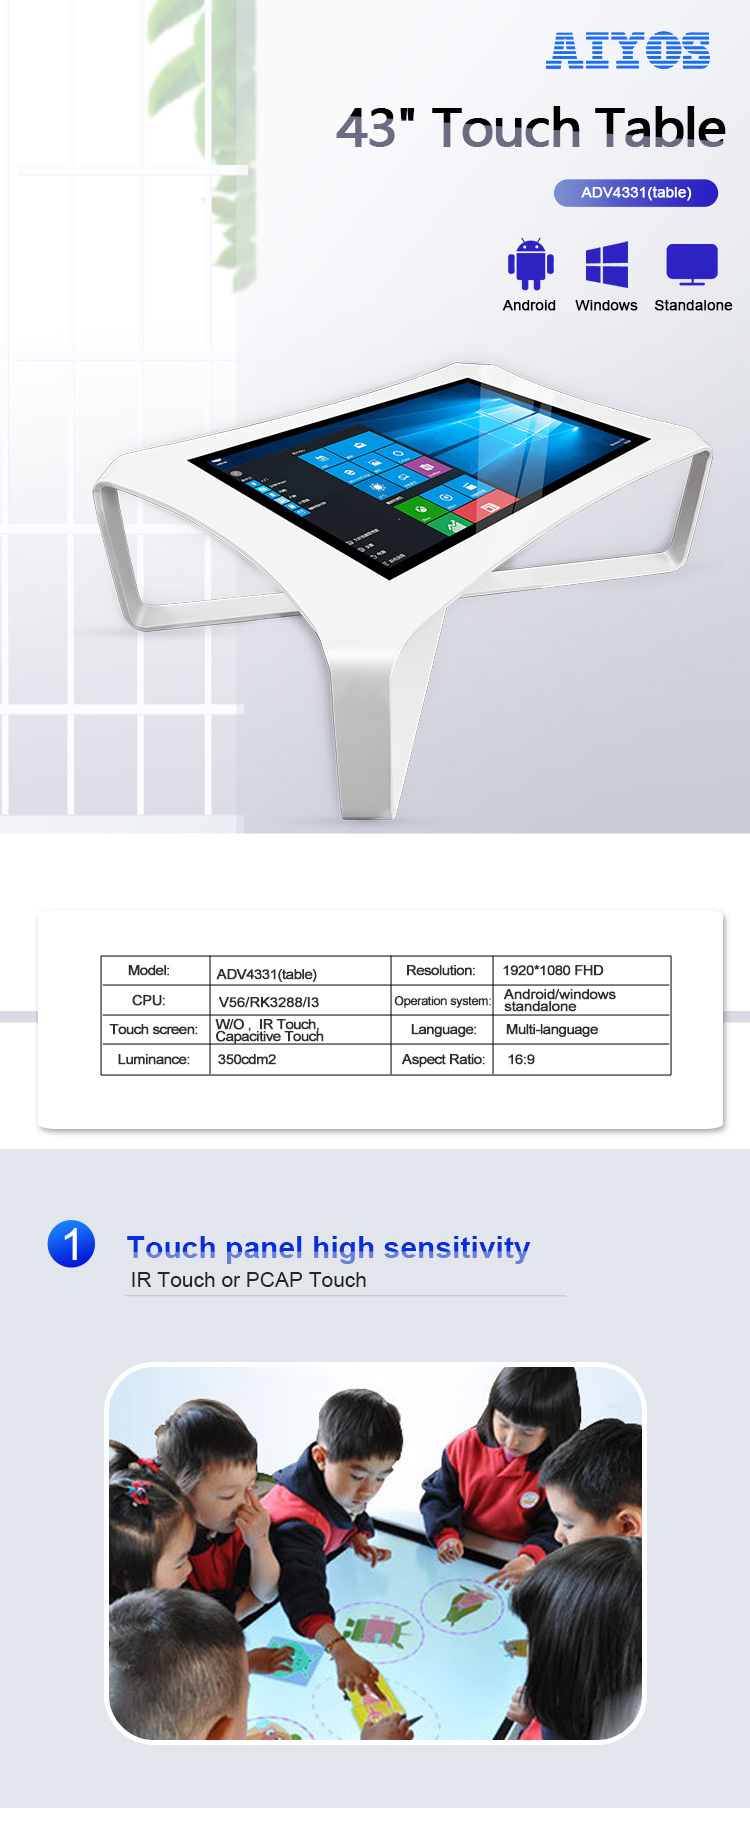 Android 6.0/7.0 Quad Core High Performance Tempered Glass Digital Table Without Touch Screen